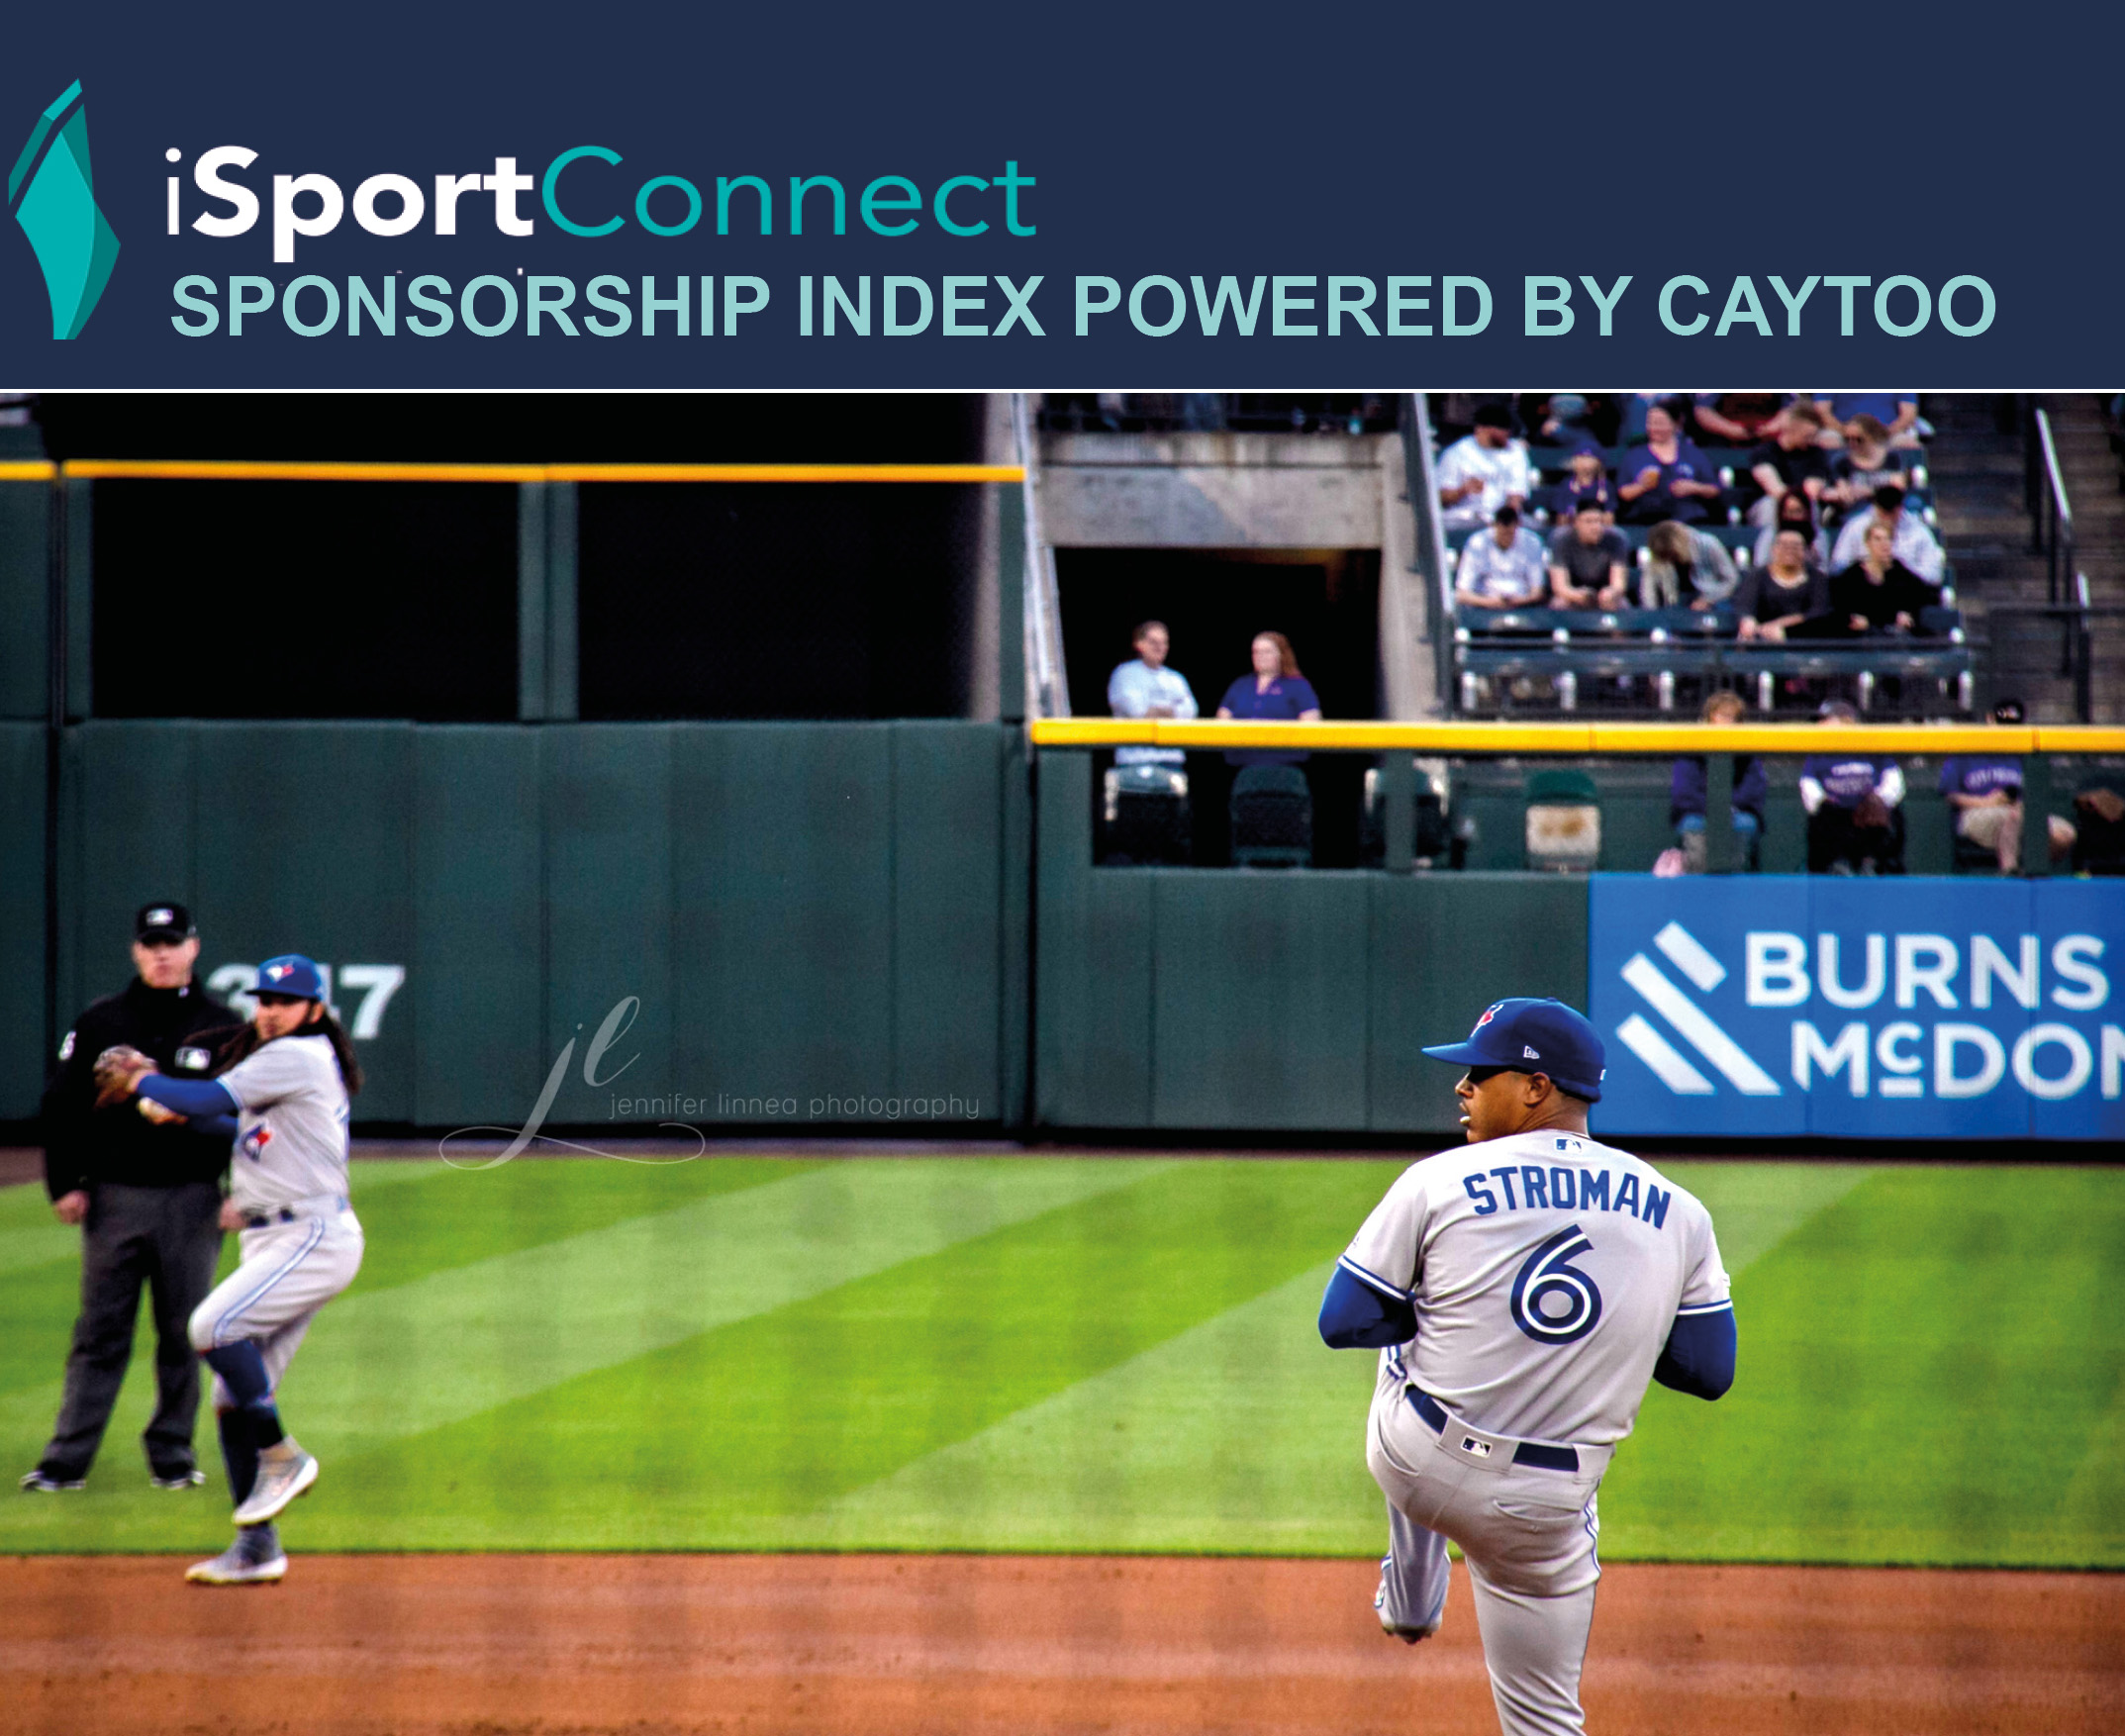 Why do financial services and F&B dominate MLB sponsorship? - iSportConnect